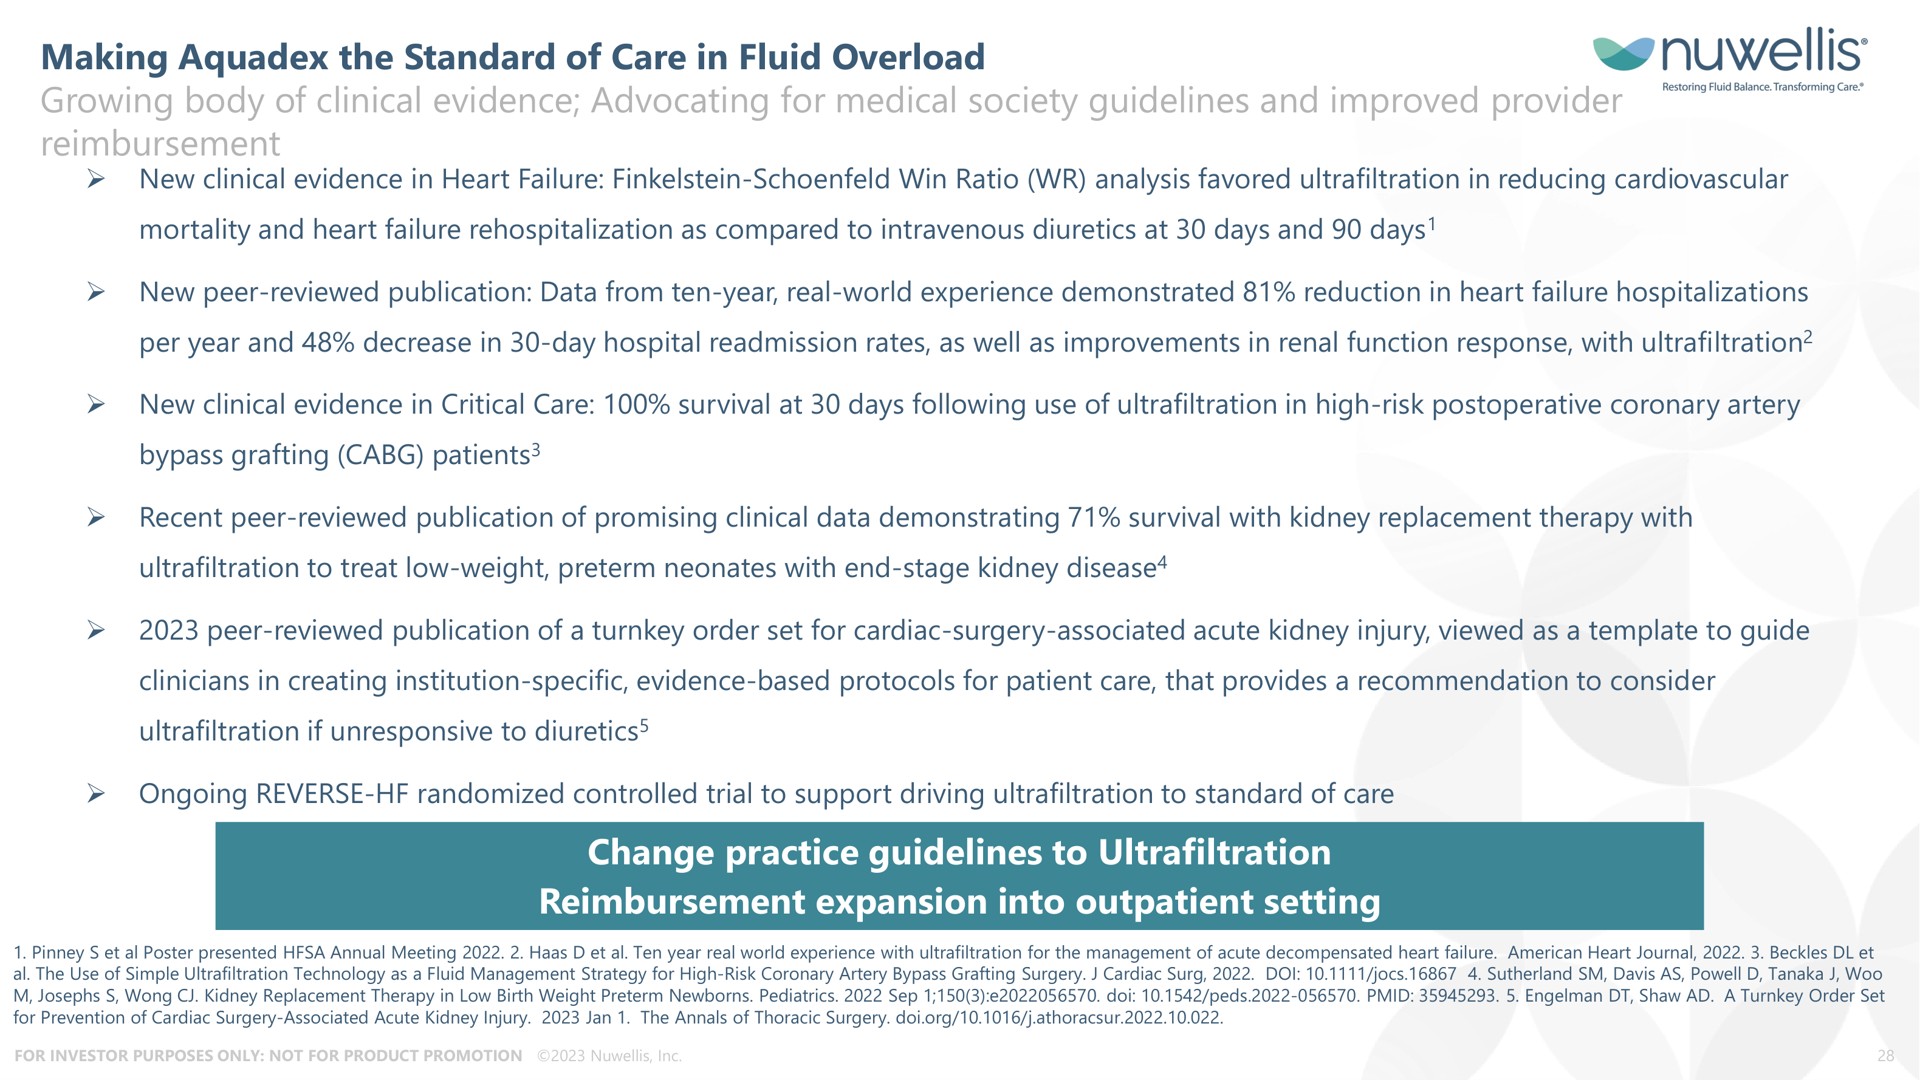 making the standard of care in fluid overload | Nuwellis